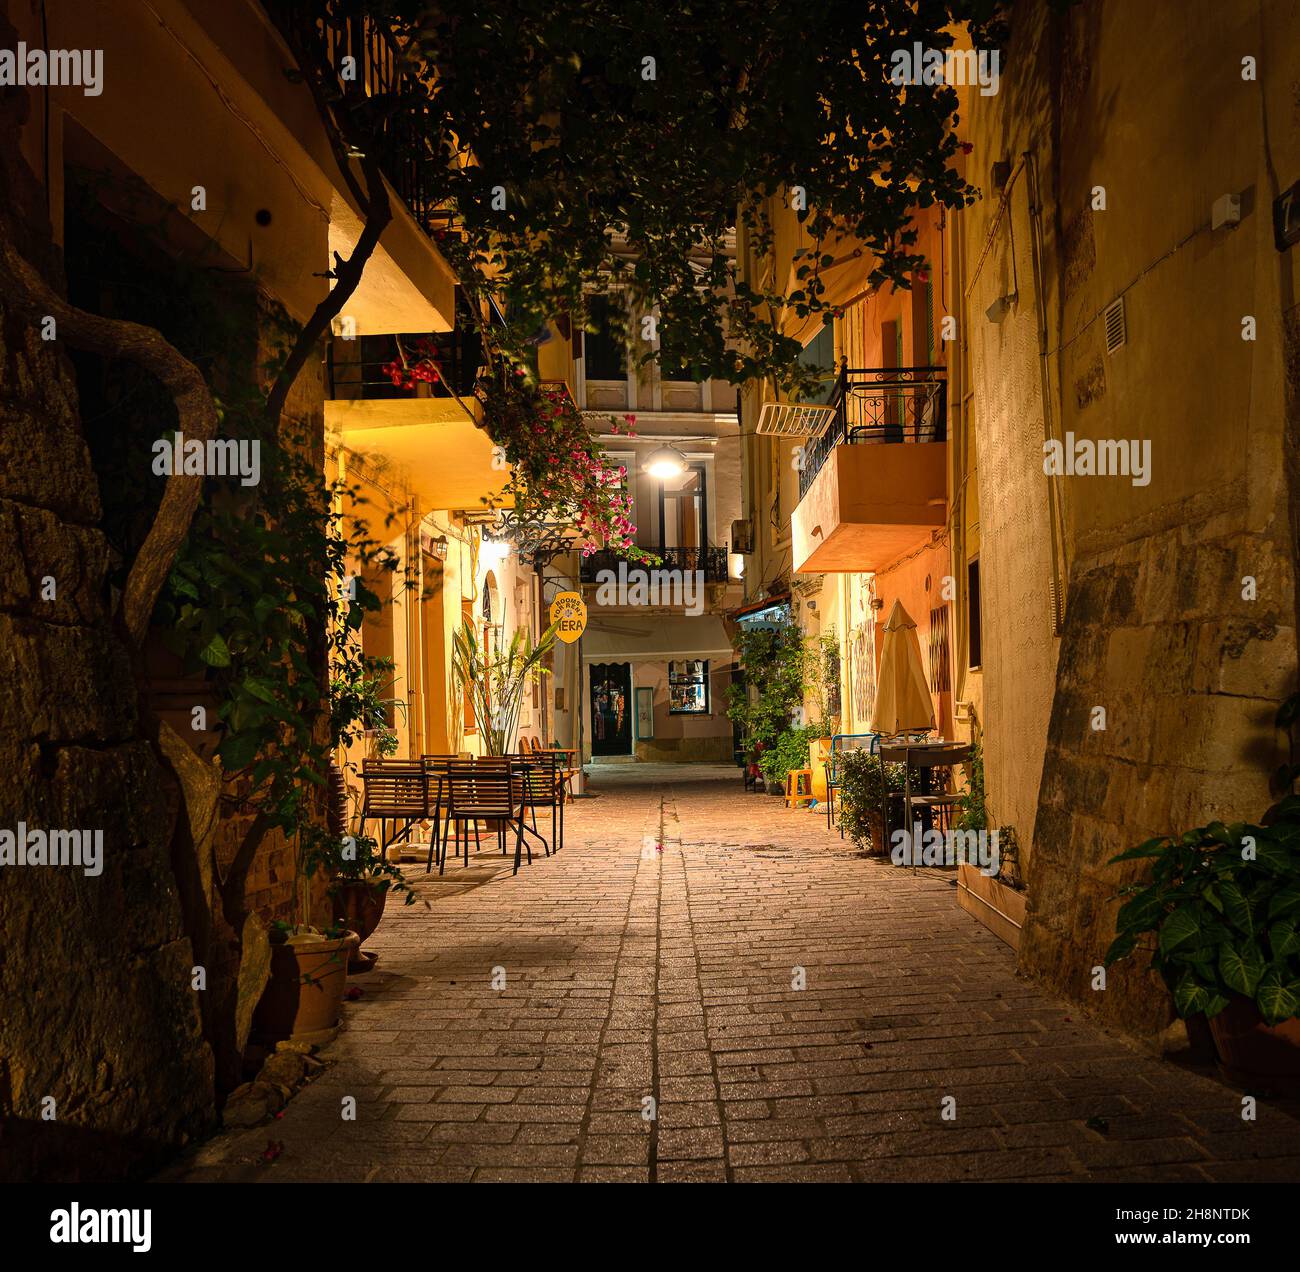 night scene in the old town of Chania from the romantic back street Michail Damaskinou, Chania, Crete, Greece, October 15, 2021 Stock Photo